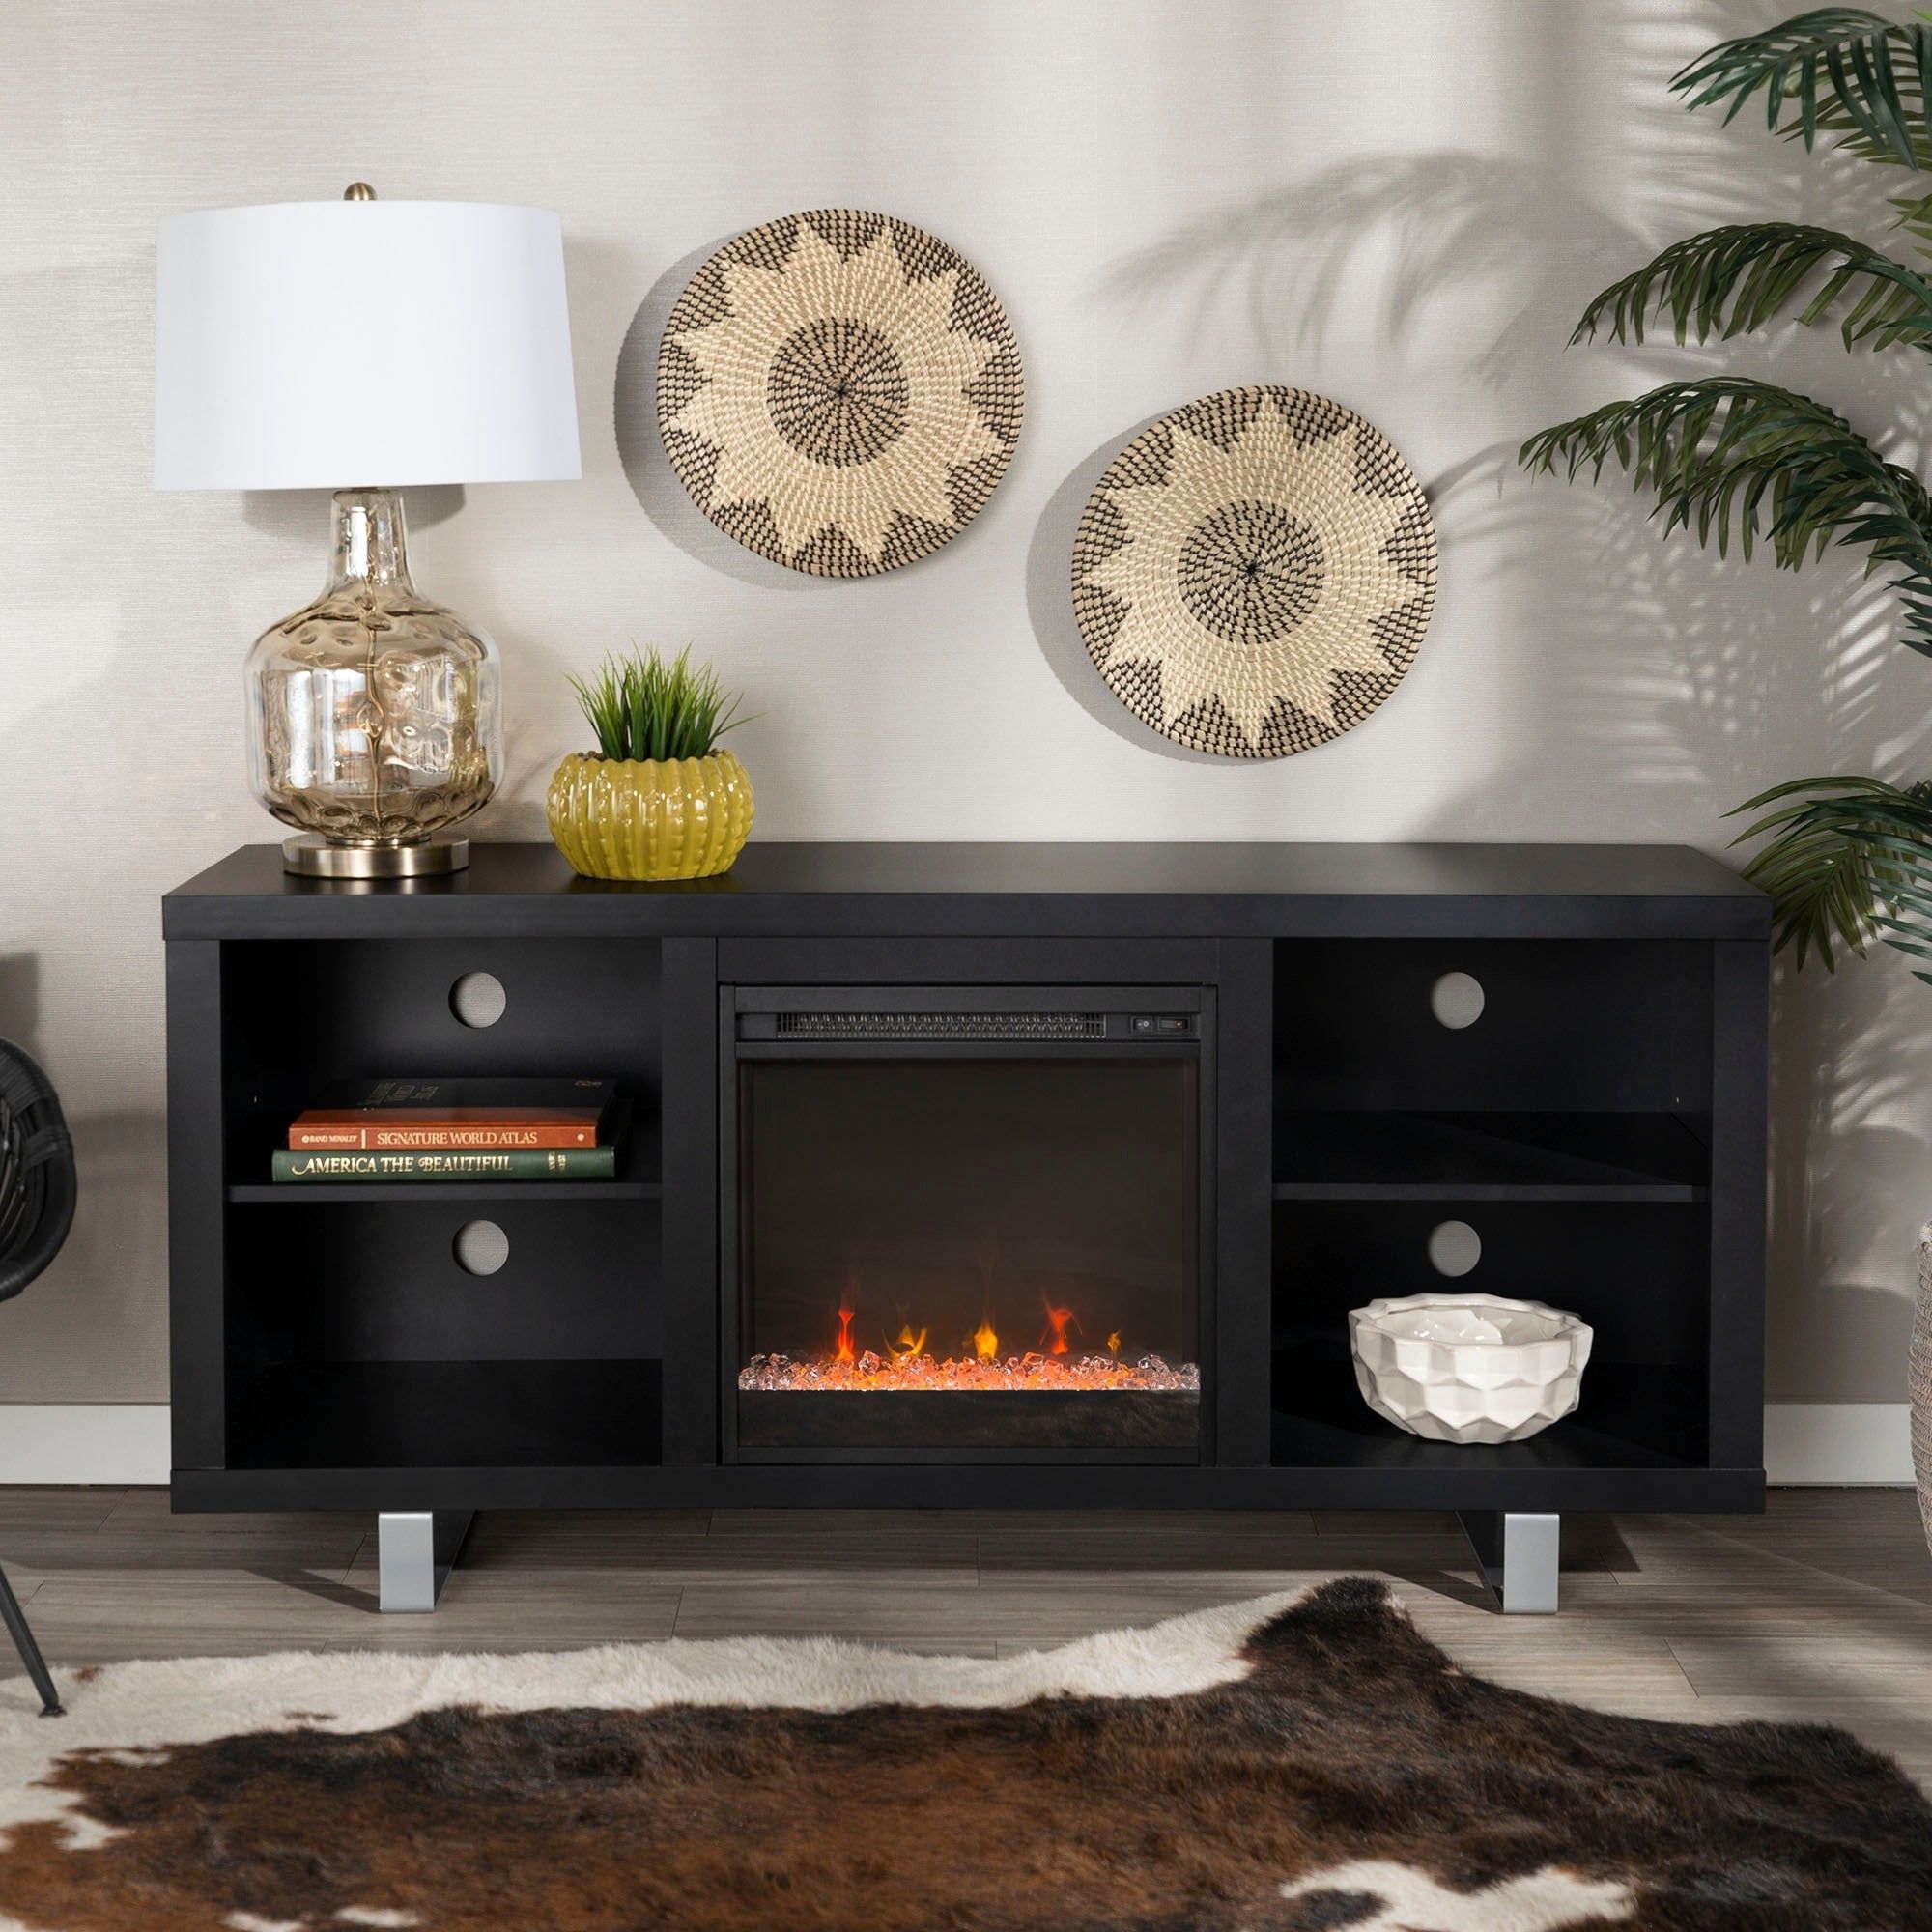 Middlebrook Designs 58" Modern Fireplace Tv Stand Console – Walmart Within Modern Fireplace Tv Stands (Gallery 6 of 20)